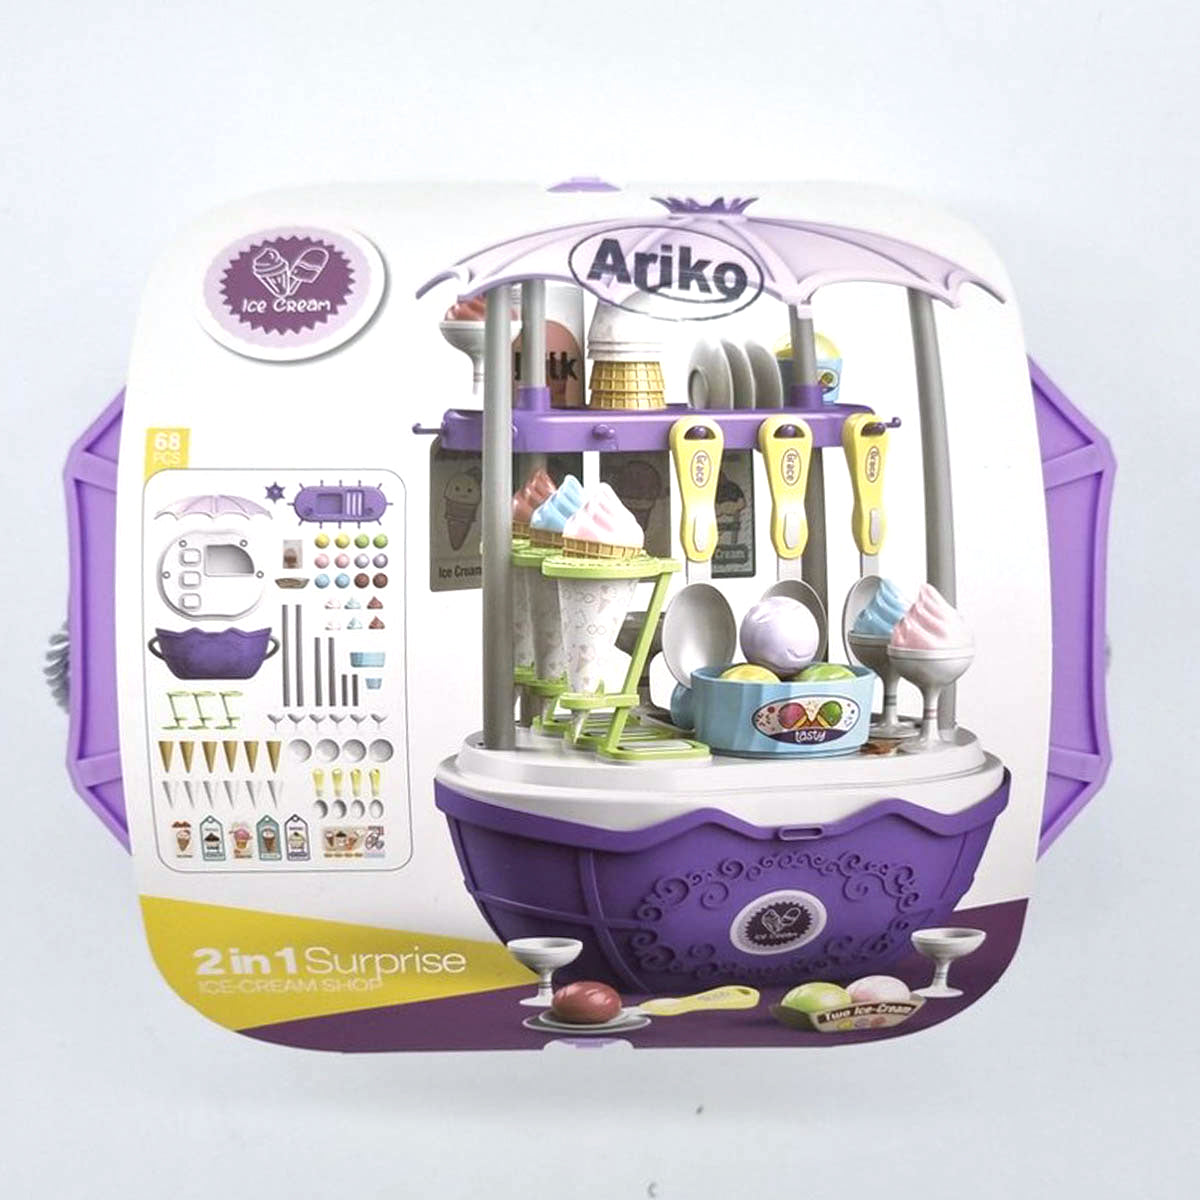 <tc>Ariko</tc>  Toy Suitcase Ice cream shop trolley shop 68 pieces - Soft ice cream, Italian ice cream, crockery, cone and much more - handy take-along suitcase